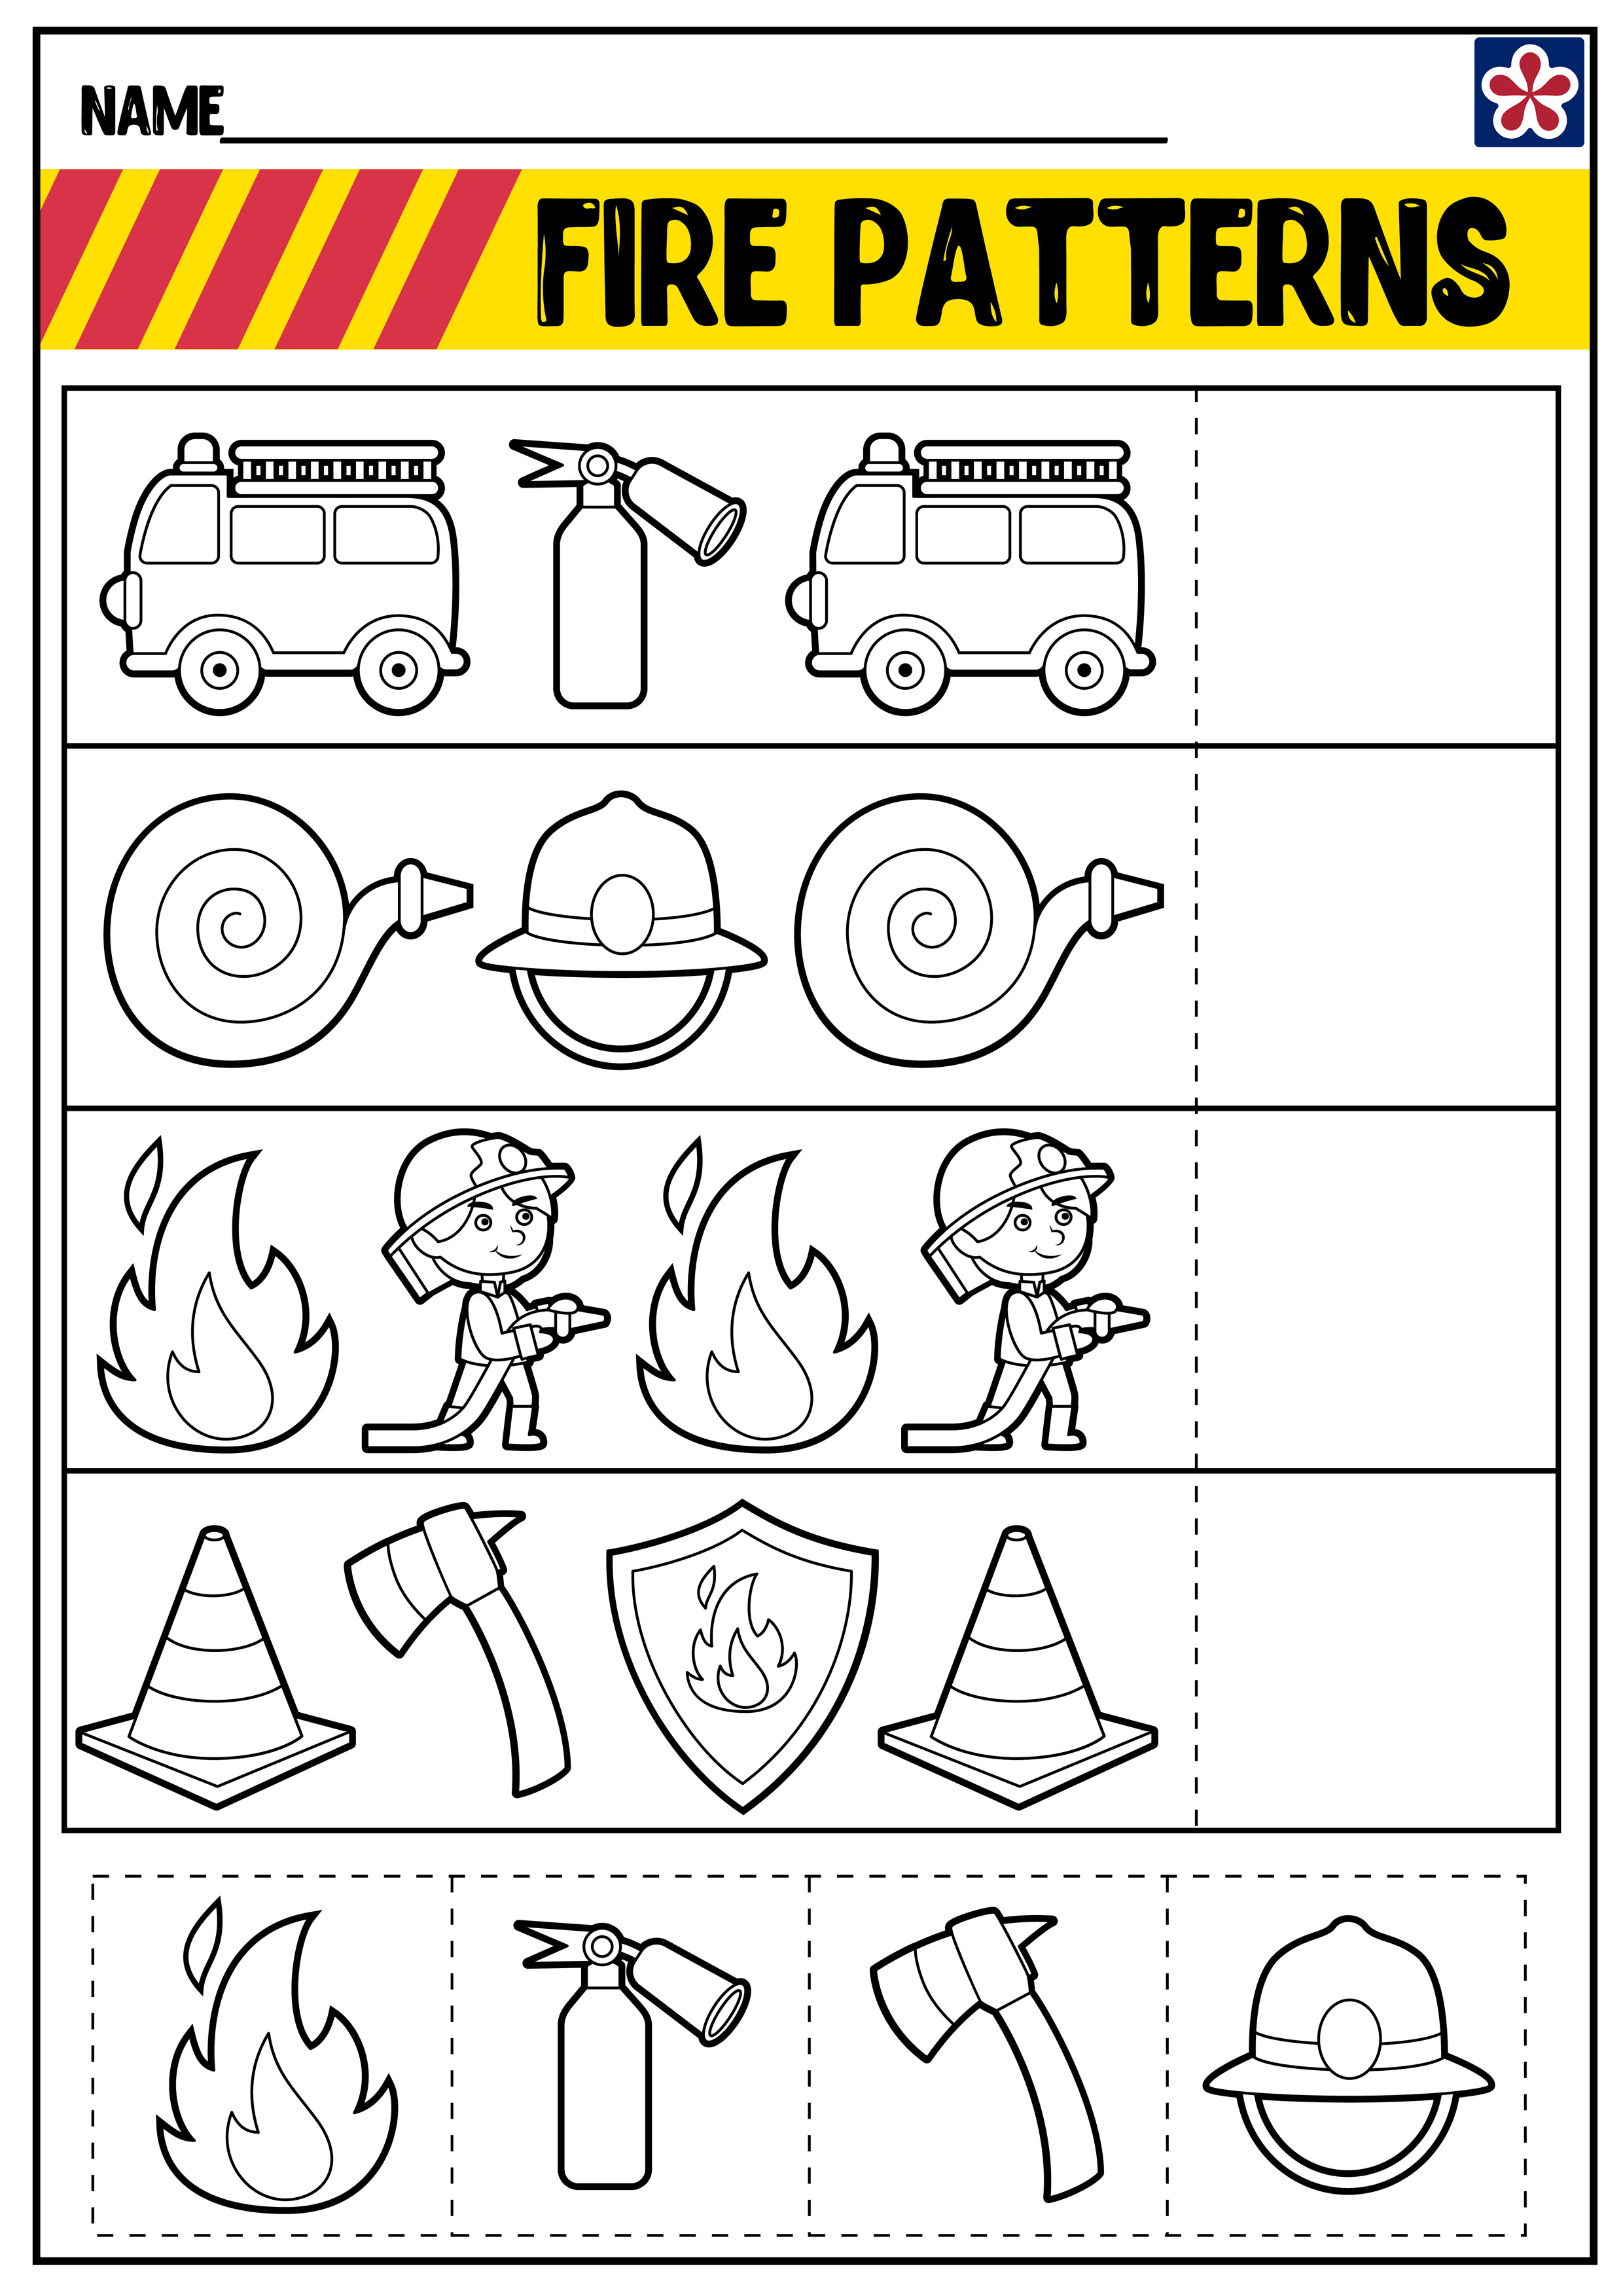 fireman-printable-coloring-pages-printable-word-searches